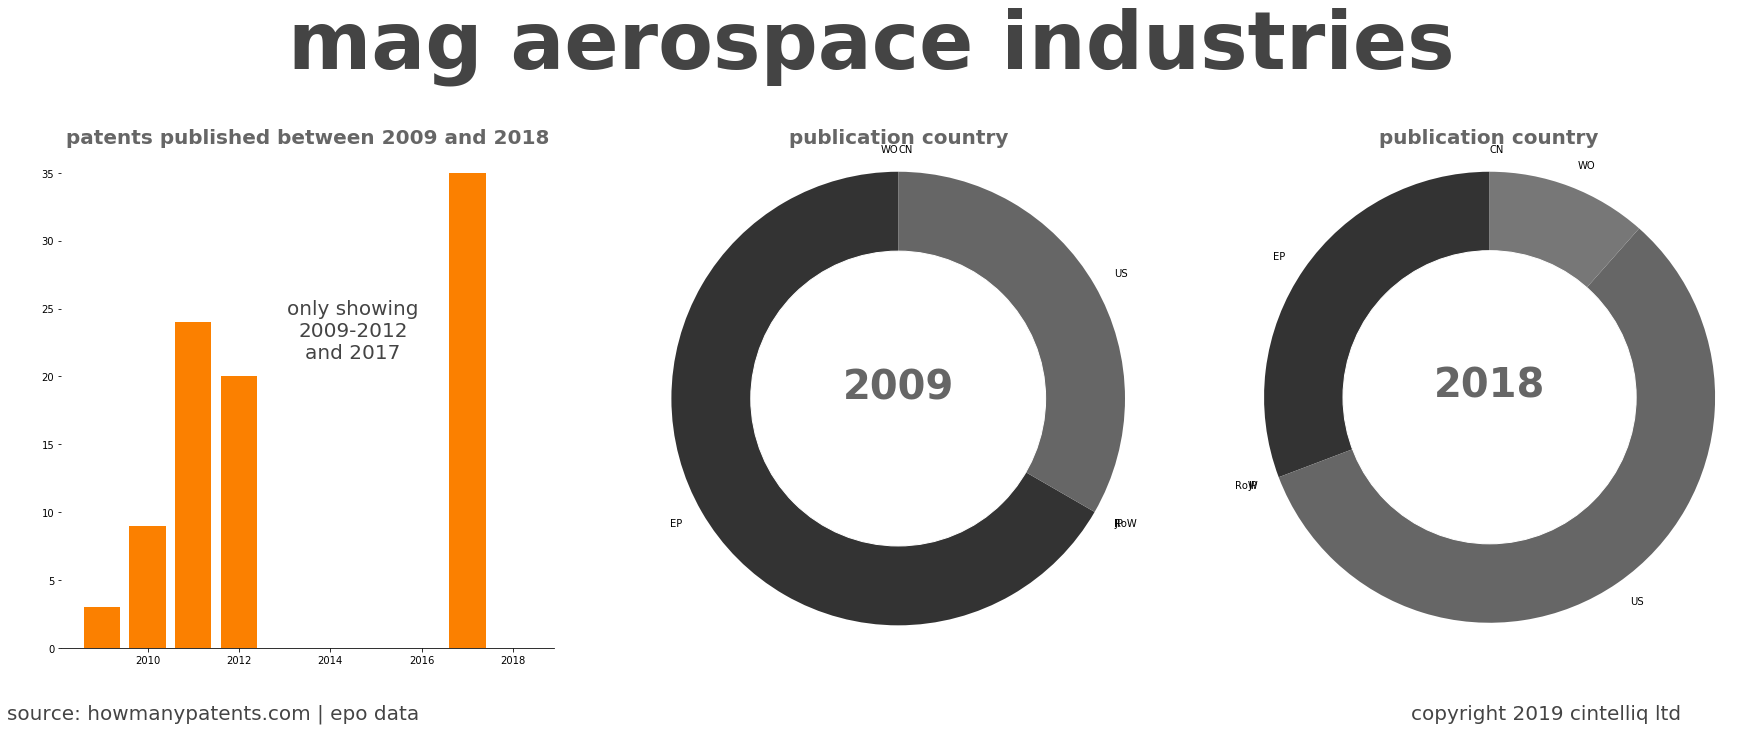 summary of patents for Mag Aerospace Industries